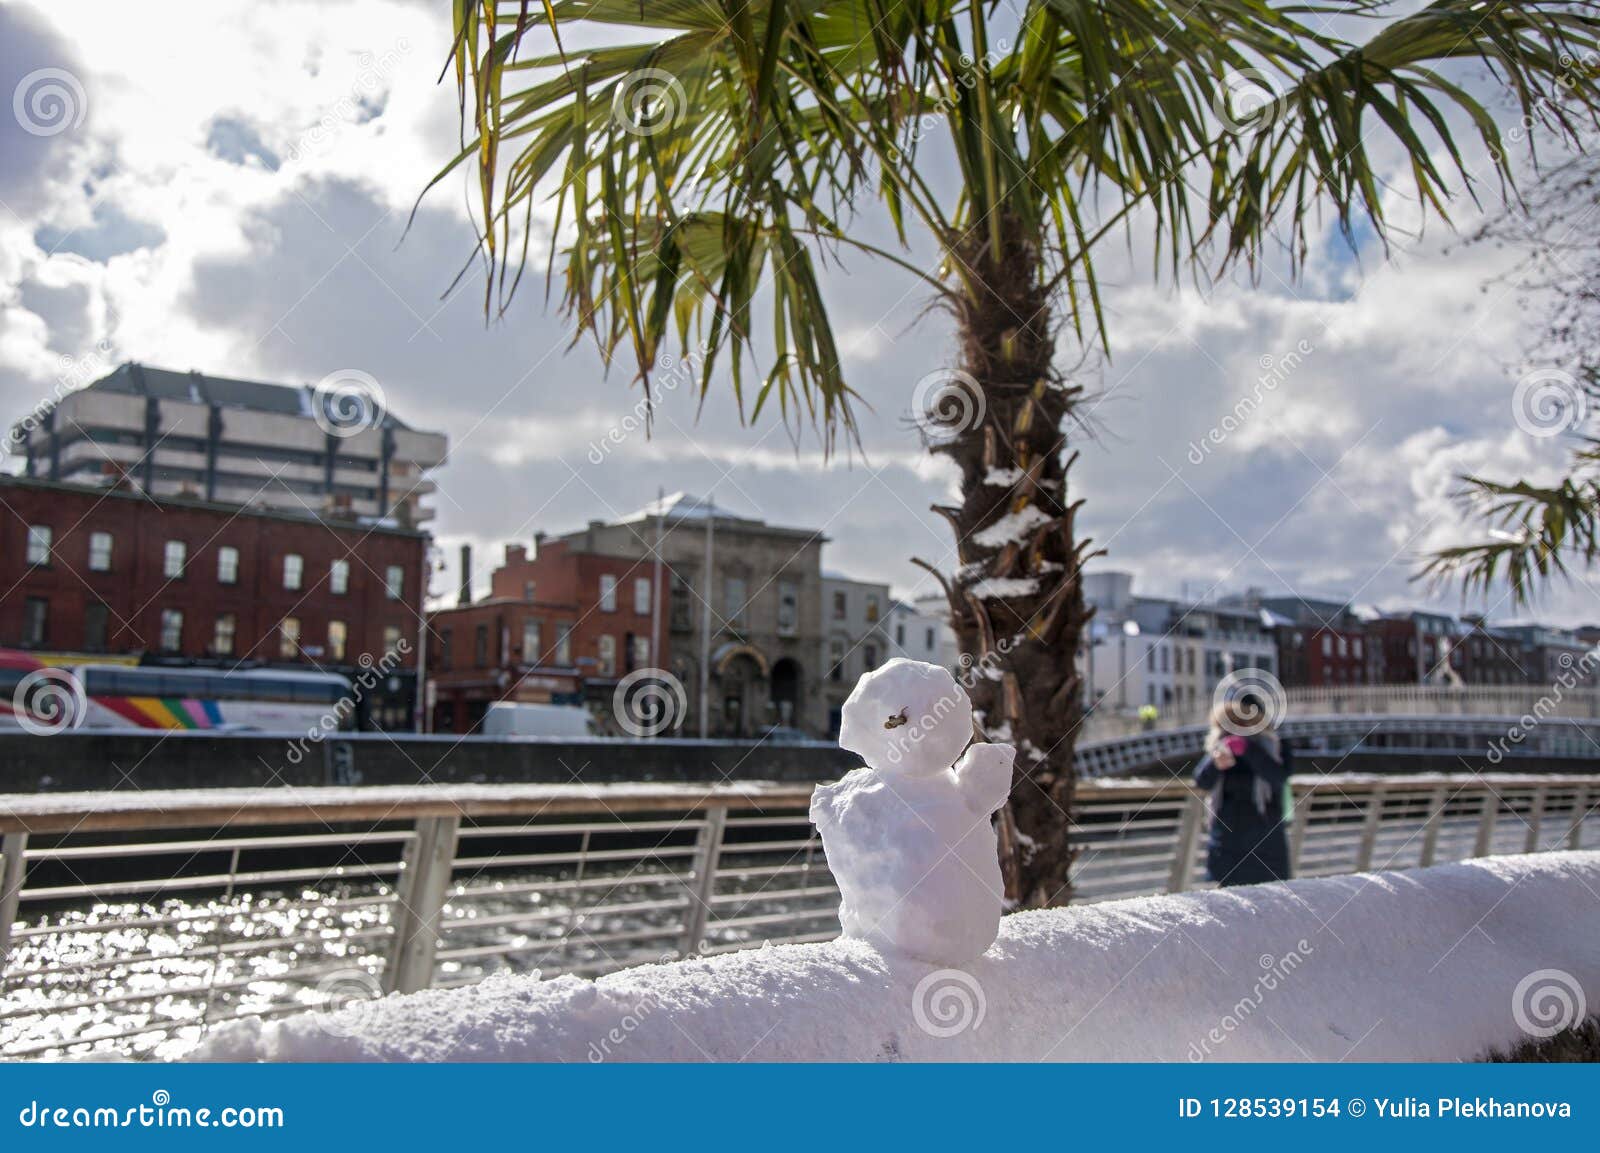  Winter  in Dublin  editorial stock image Image of weather 